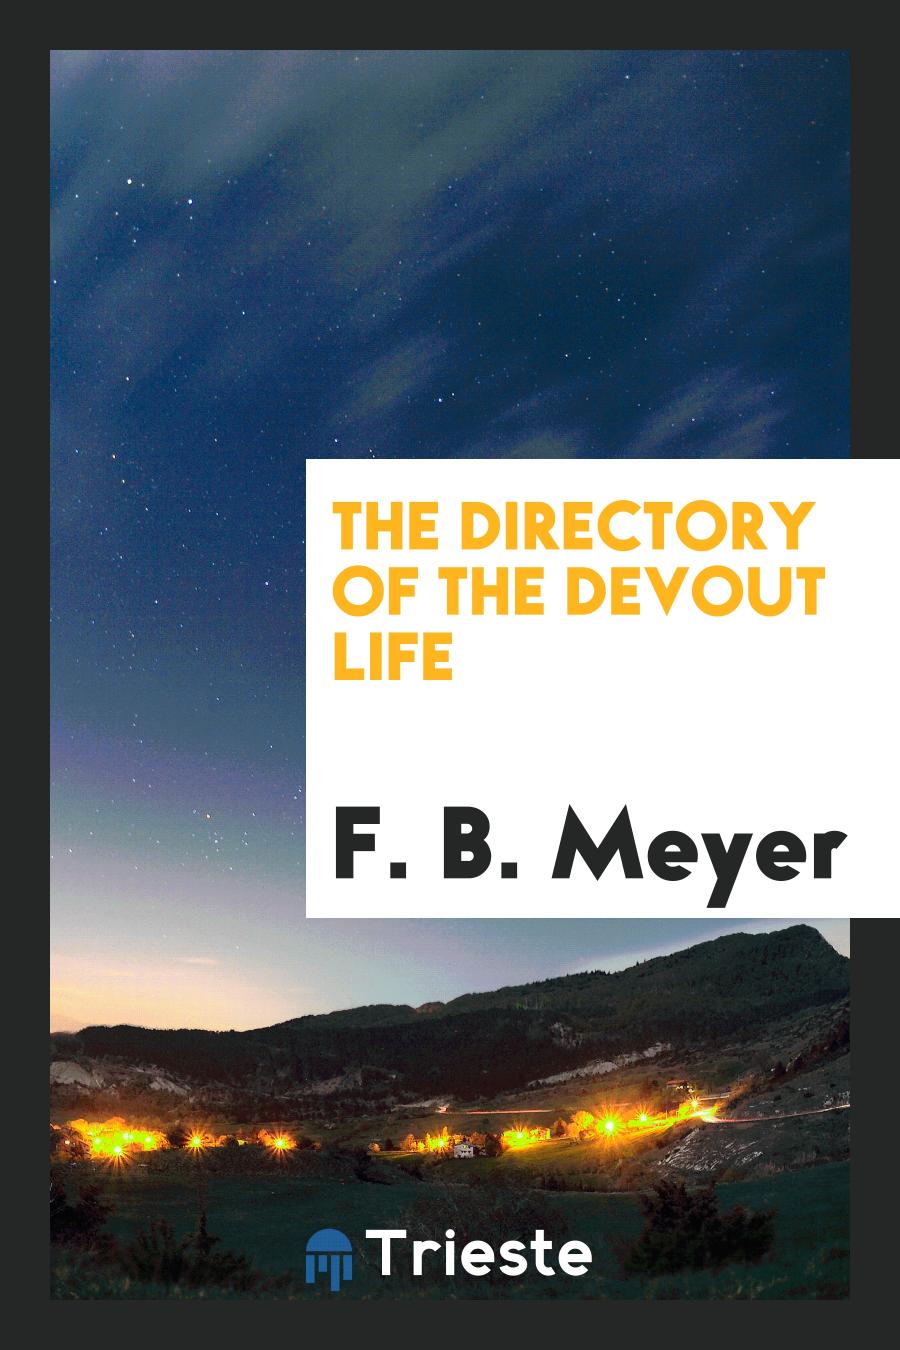 The Directory of the Devout Life